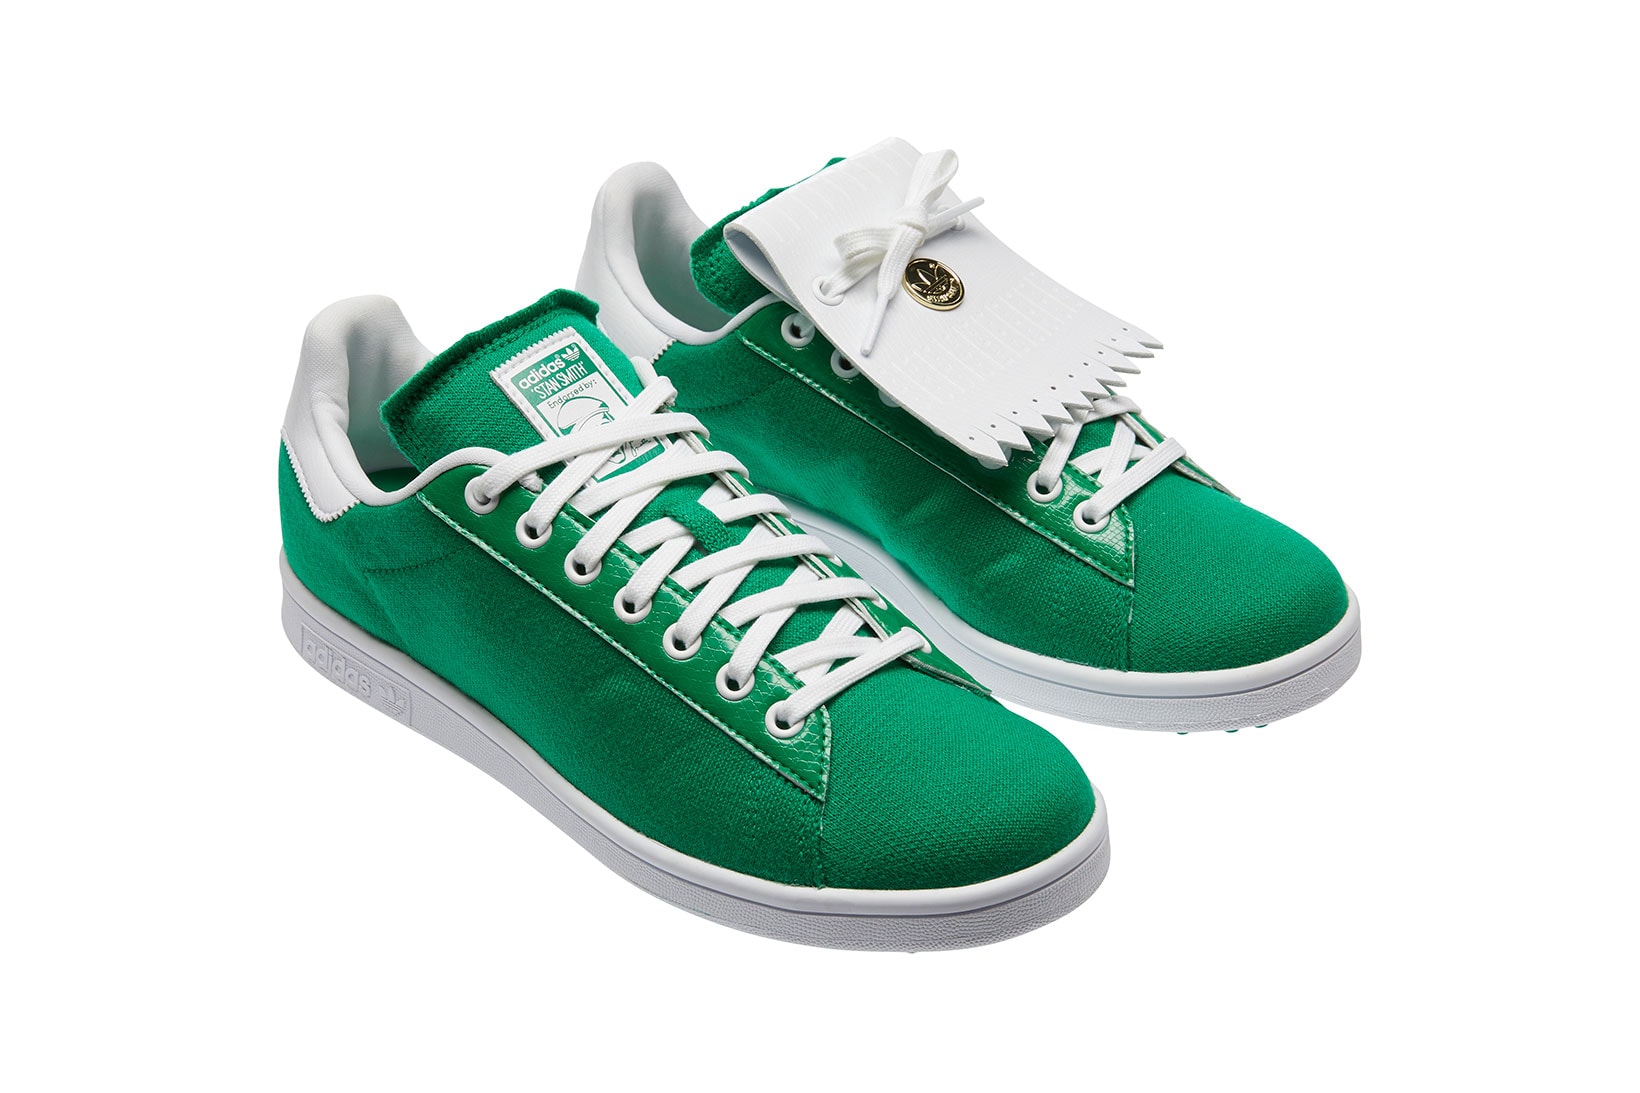 adidas originals golf stan smith sneakers sustainable green white footwear shoes kicks sneakerhead lateral